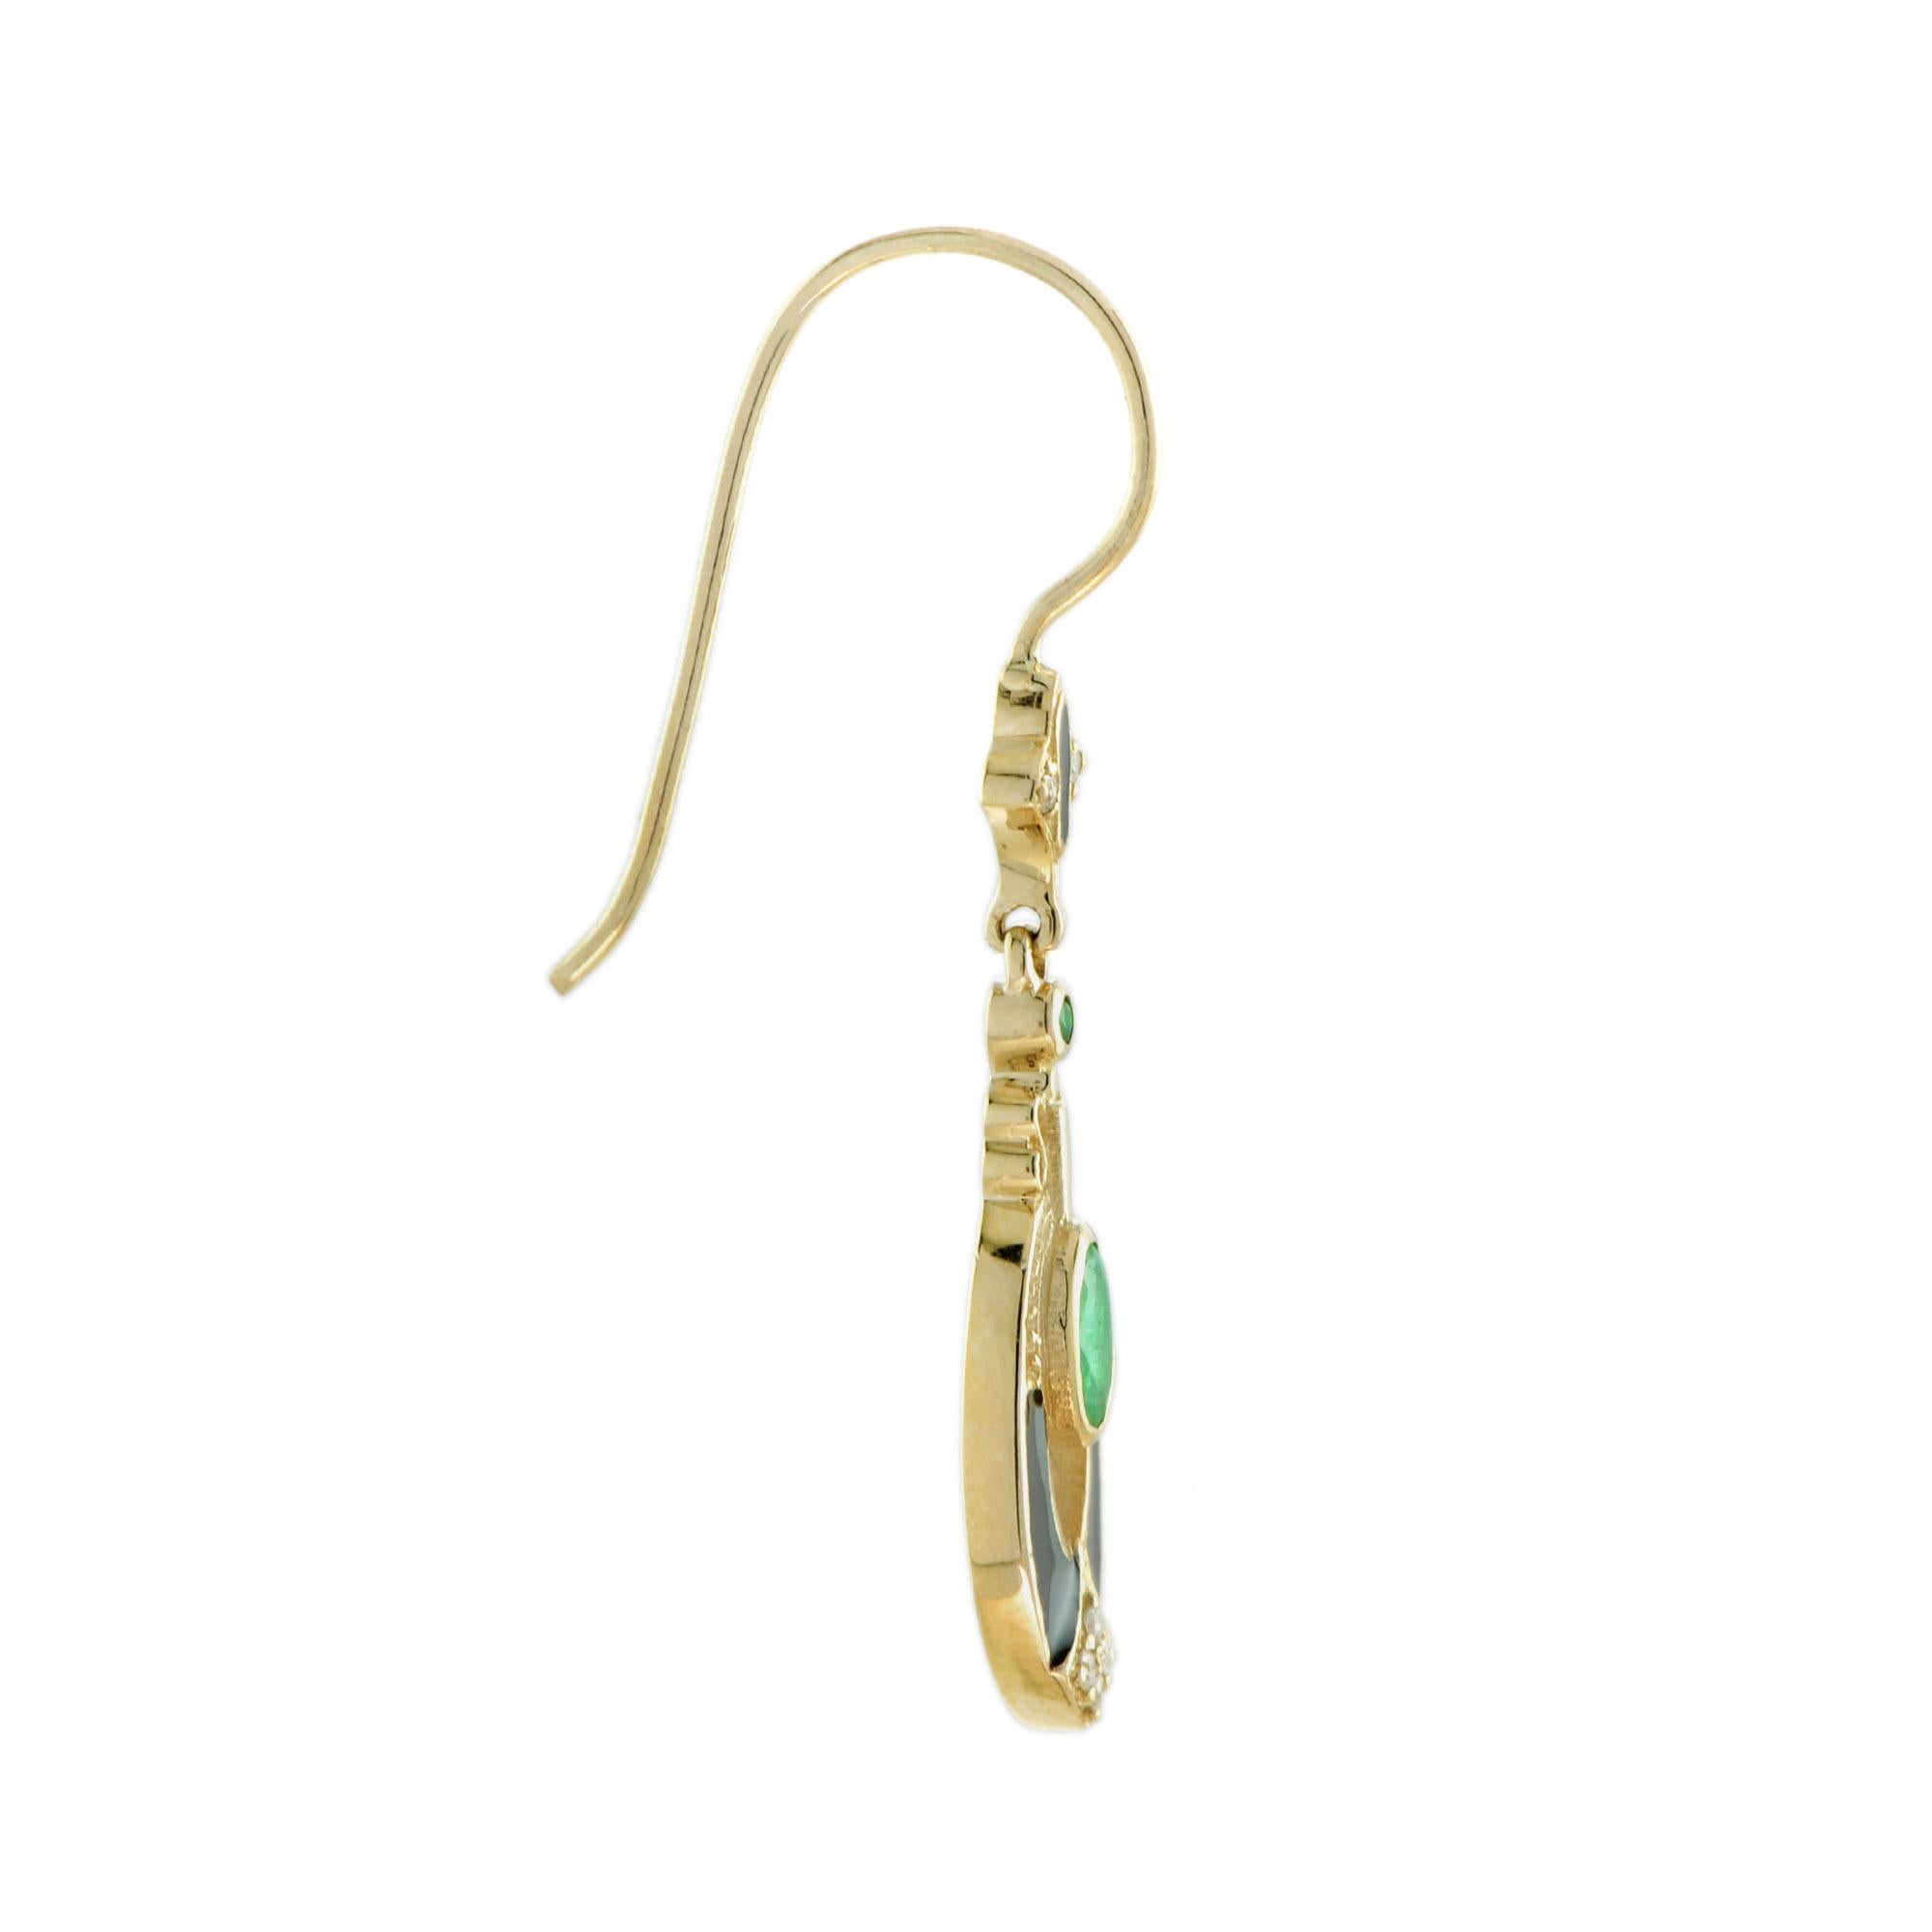 An Art Deco looking pair of earrings, with natural emeralds, round diamonds and enamel. The earrings are set in 9k yellow gold. 

Information
Metal: 9K Yellow Gold
Width: 8 mm.
Length: 40 mm.
Weight: 3.43 g. (approx. in total)
Backing: French